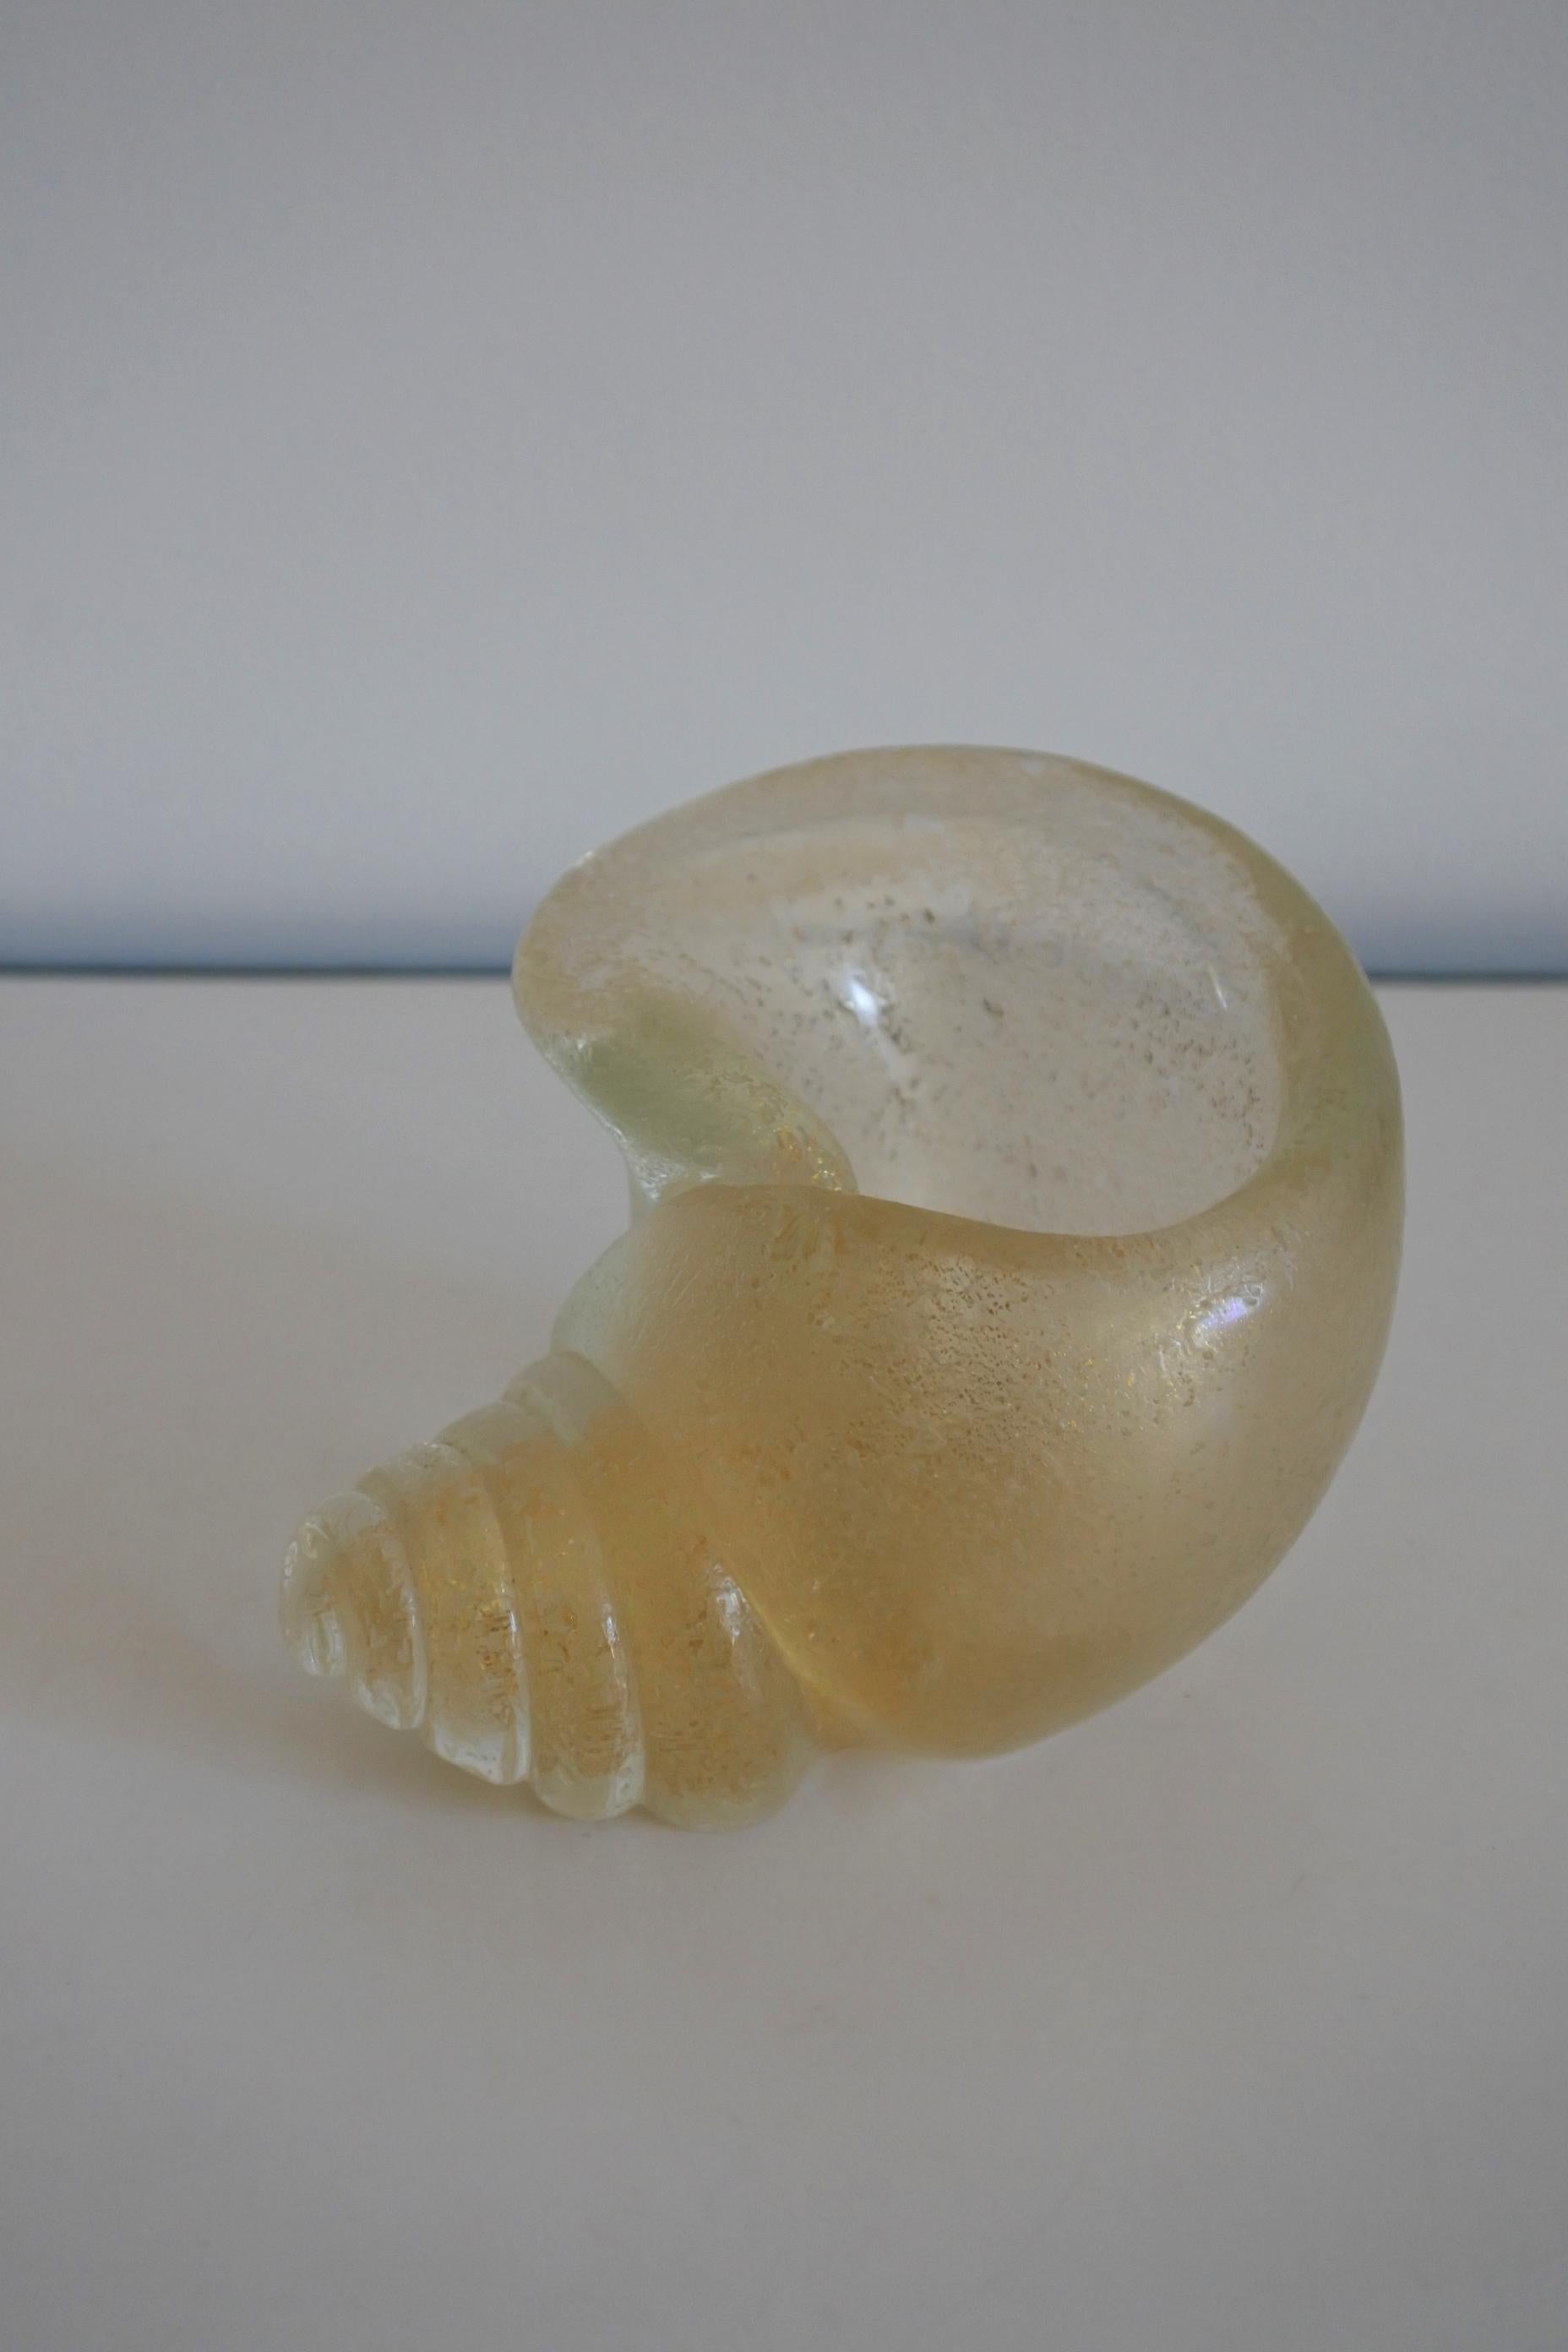 Conch shell shaped vase or bowl in hand blown thick glass by Seguso, Murano Italy, circa 1940s.
This piece was made using two complex technics: 